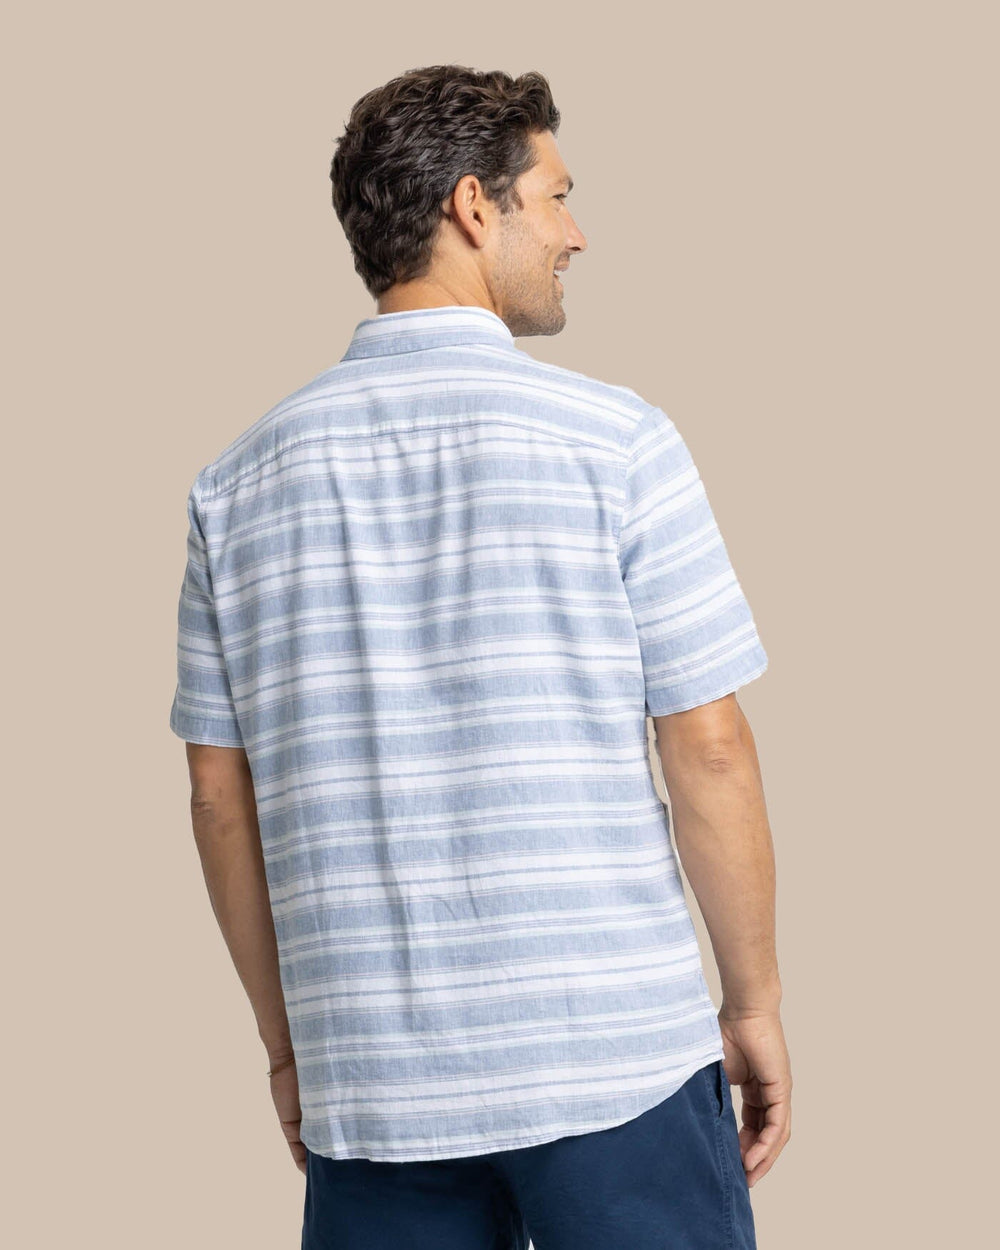 The back view of the Southern Tide Linen Rayon Timmonsok Stripe Short Sleeve Sport Shirt by Southern Tide - Coronet Blue